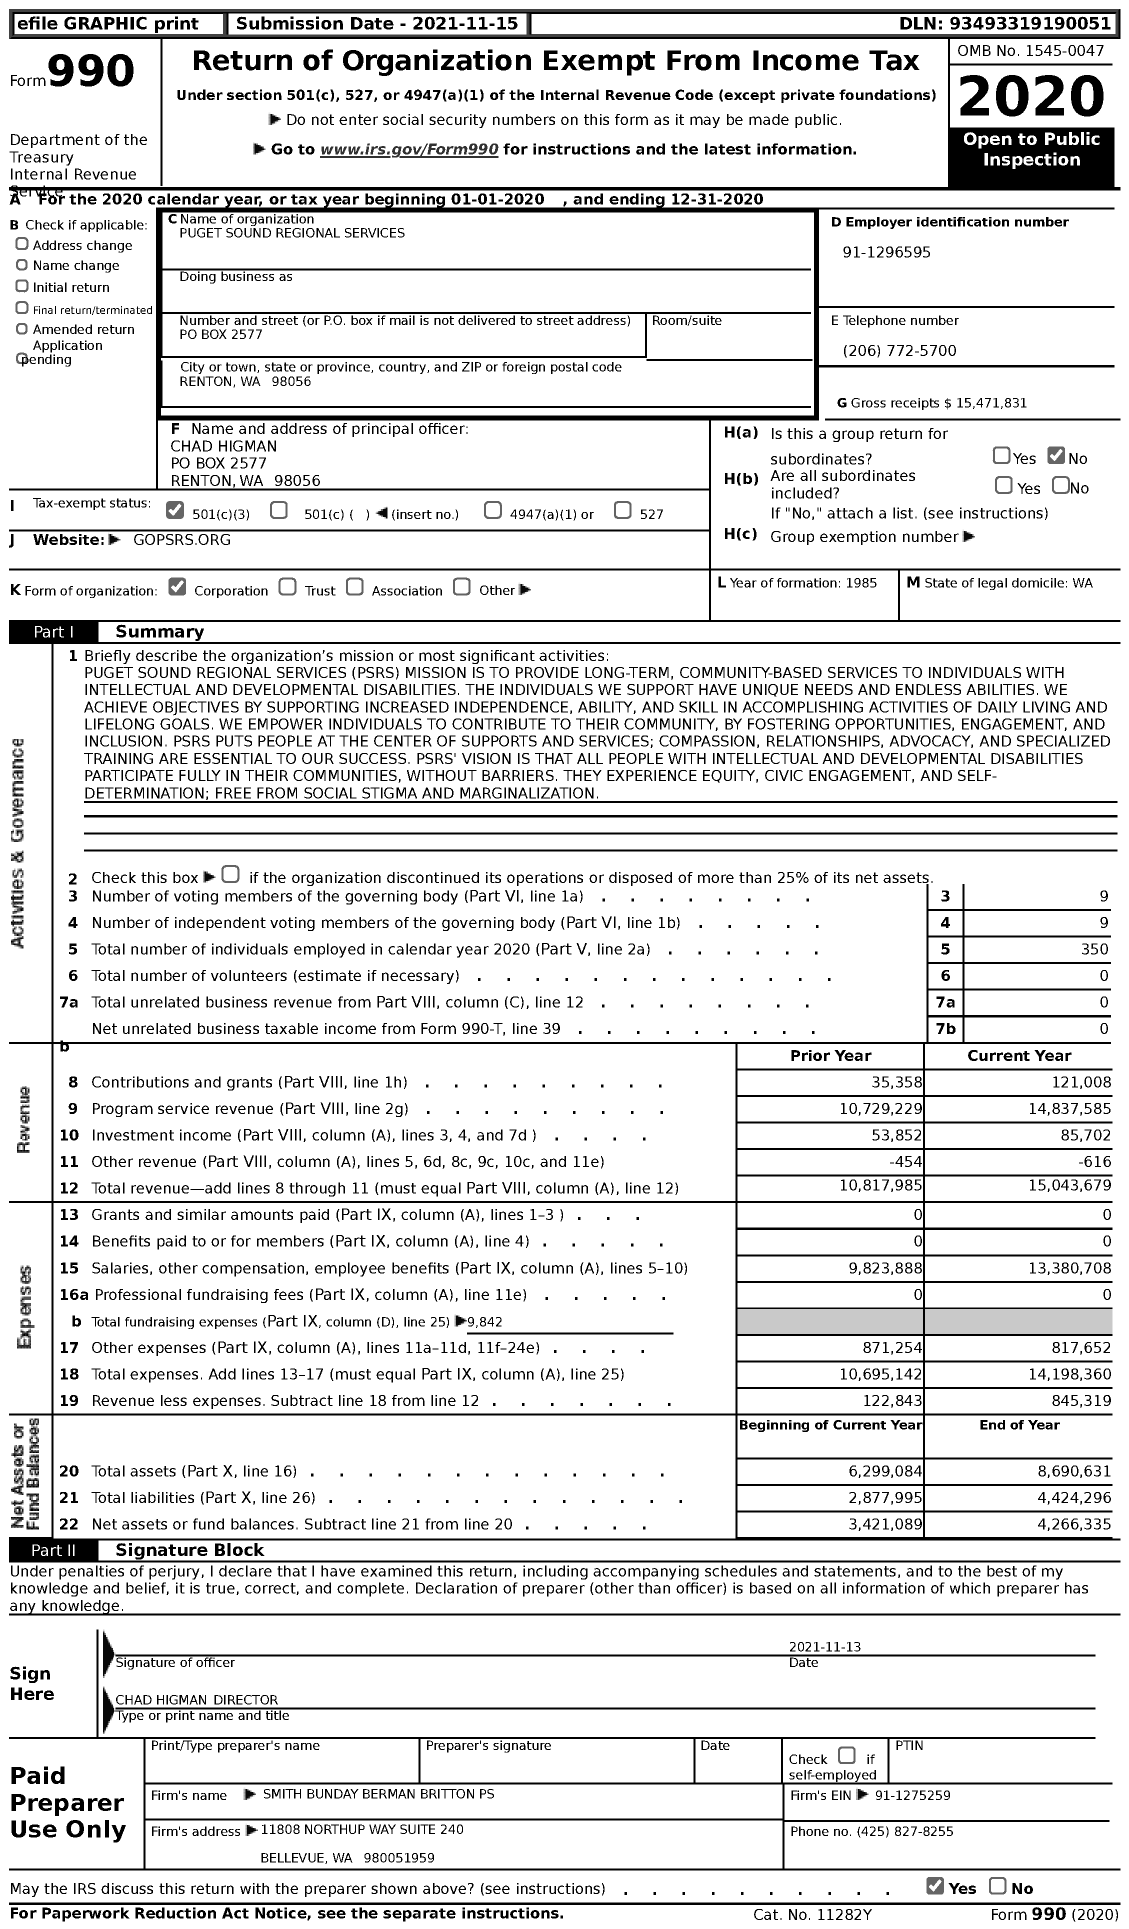 Image of first page of 2020 Form 990 for Puget Sound Regional Services